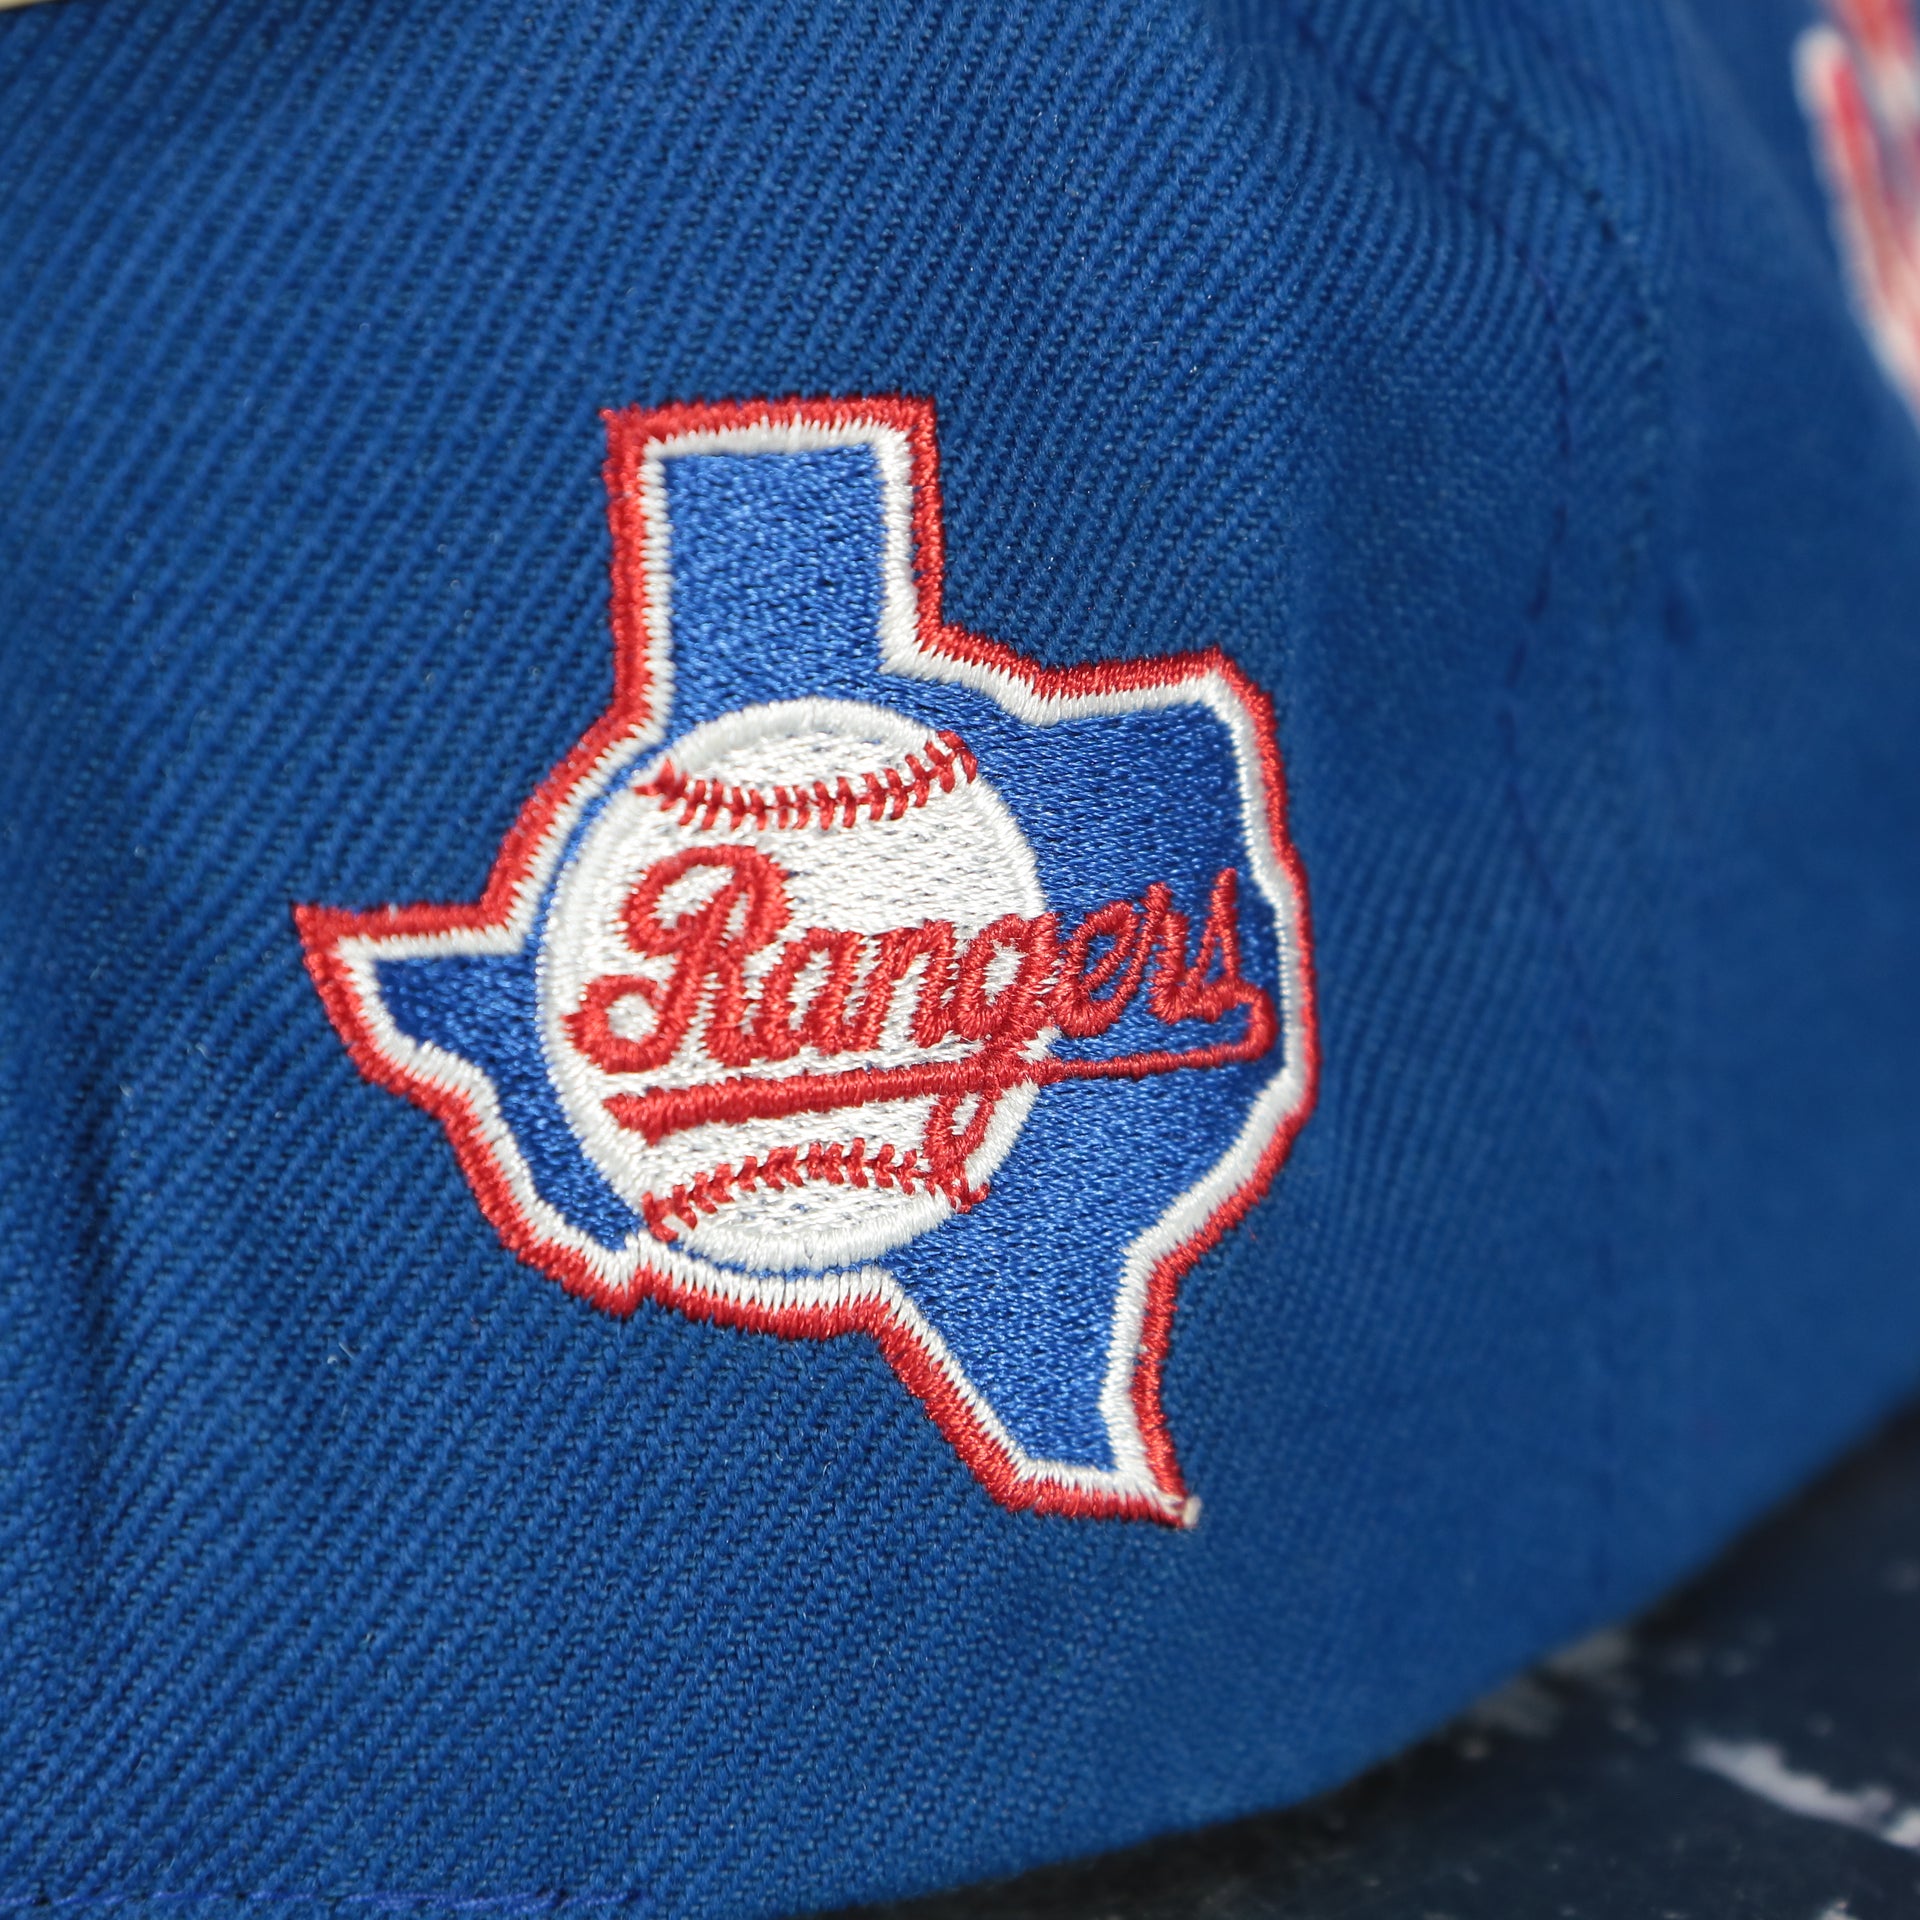 rangers patch on the Cooperstown Texas Rangers Blockhead Green Bottom | Two tone Blue on Red Snapback Hat